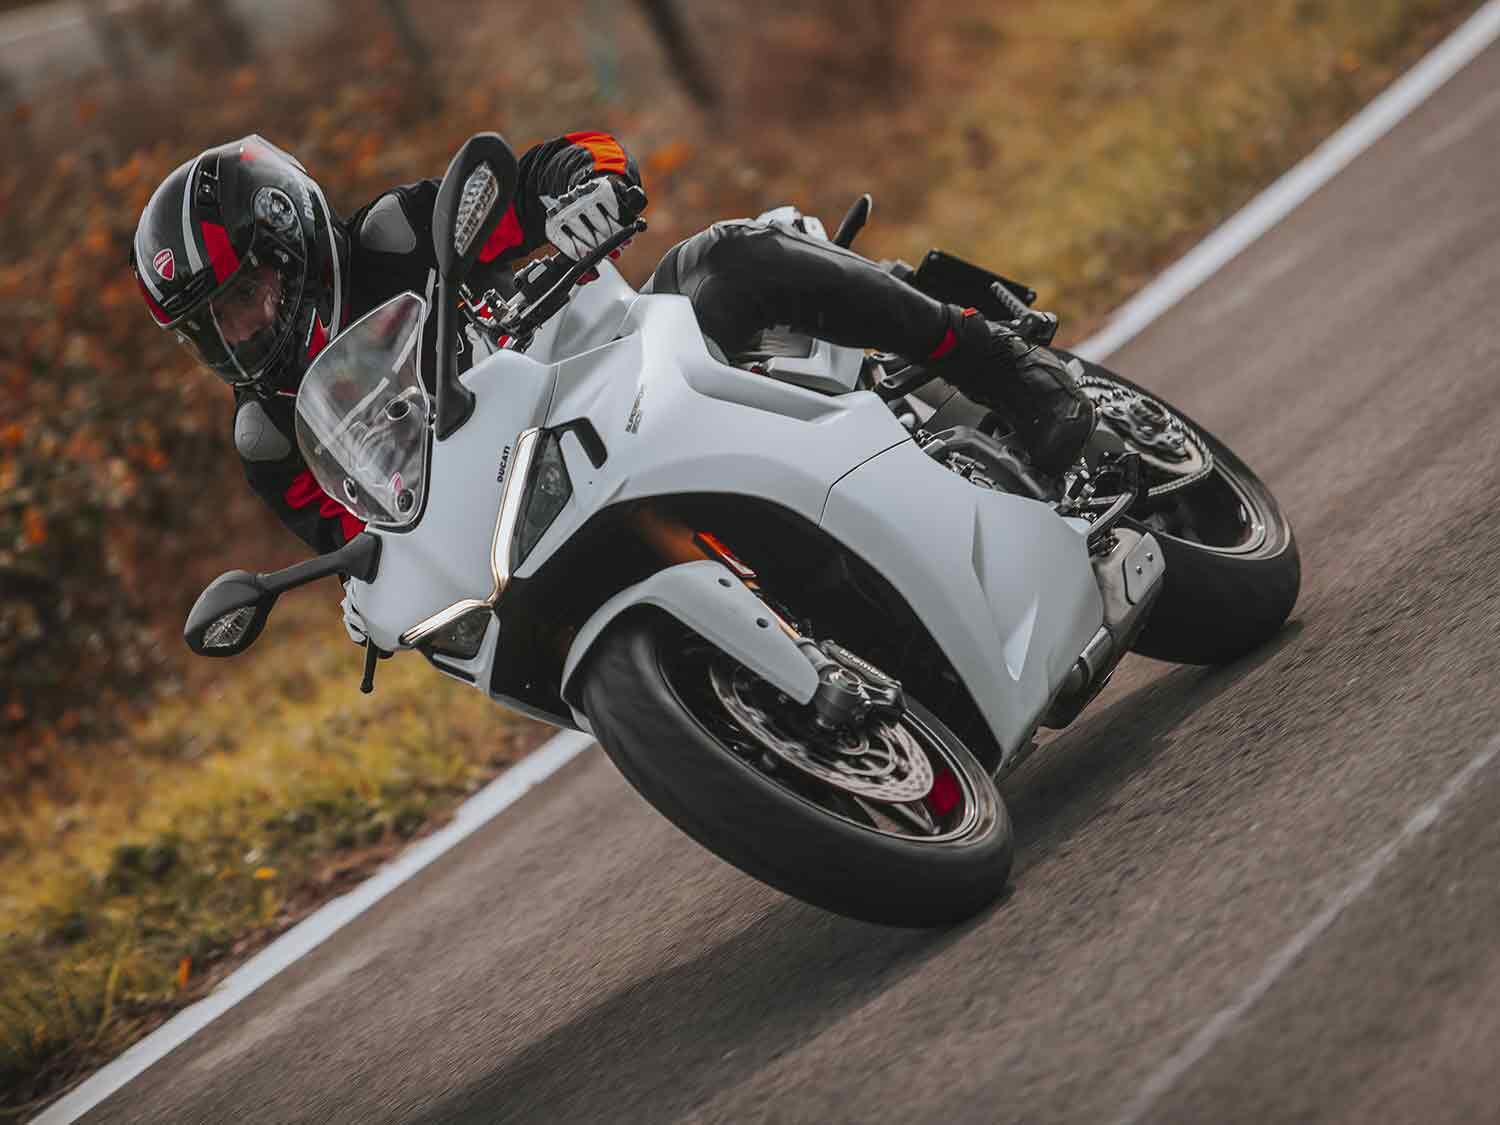 2021 Ducati 950 SuperSport First Look Preview Photo Gallery - News AKMI